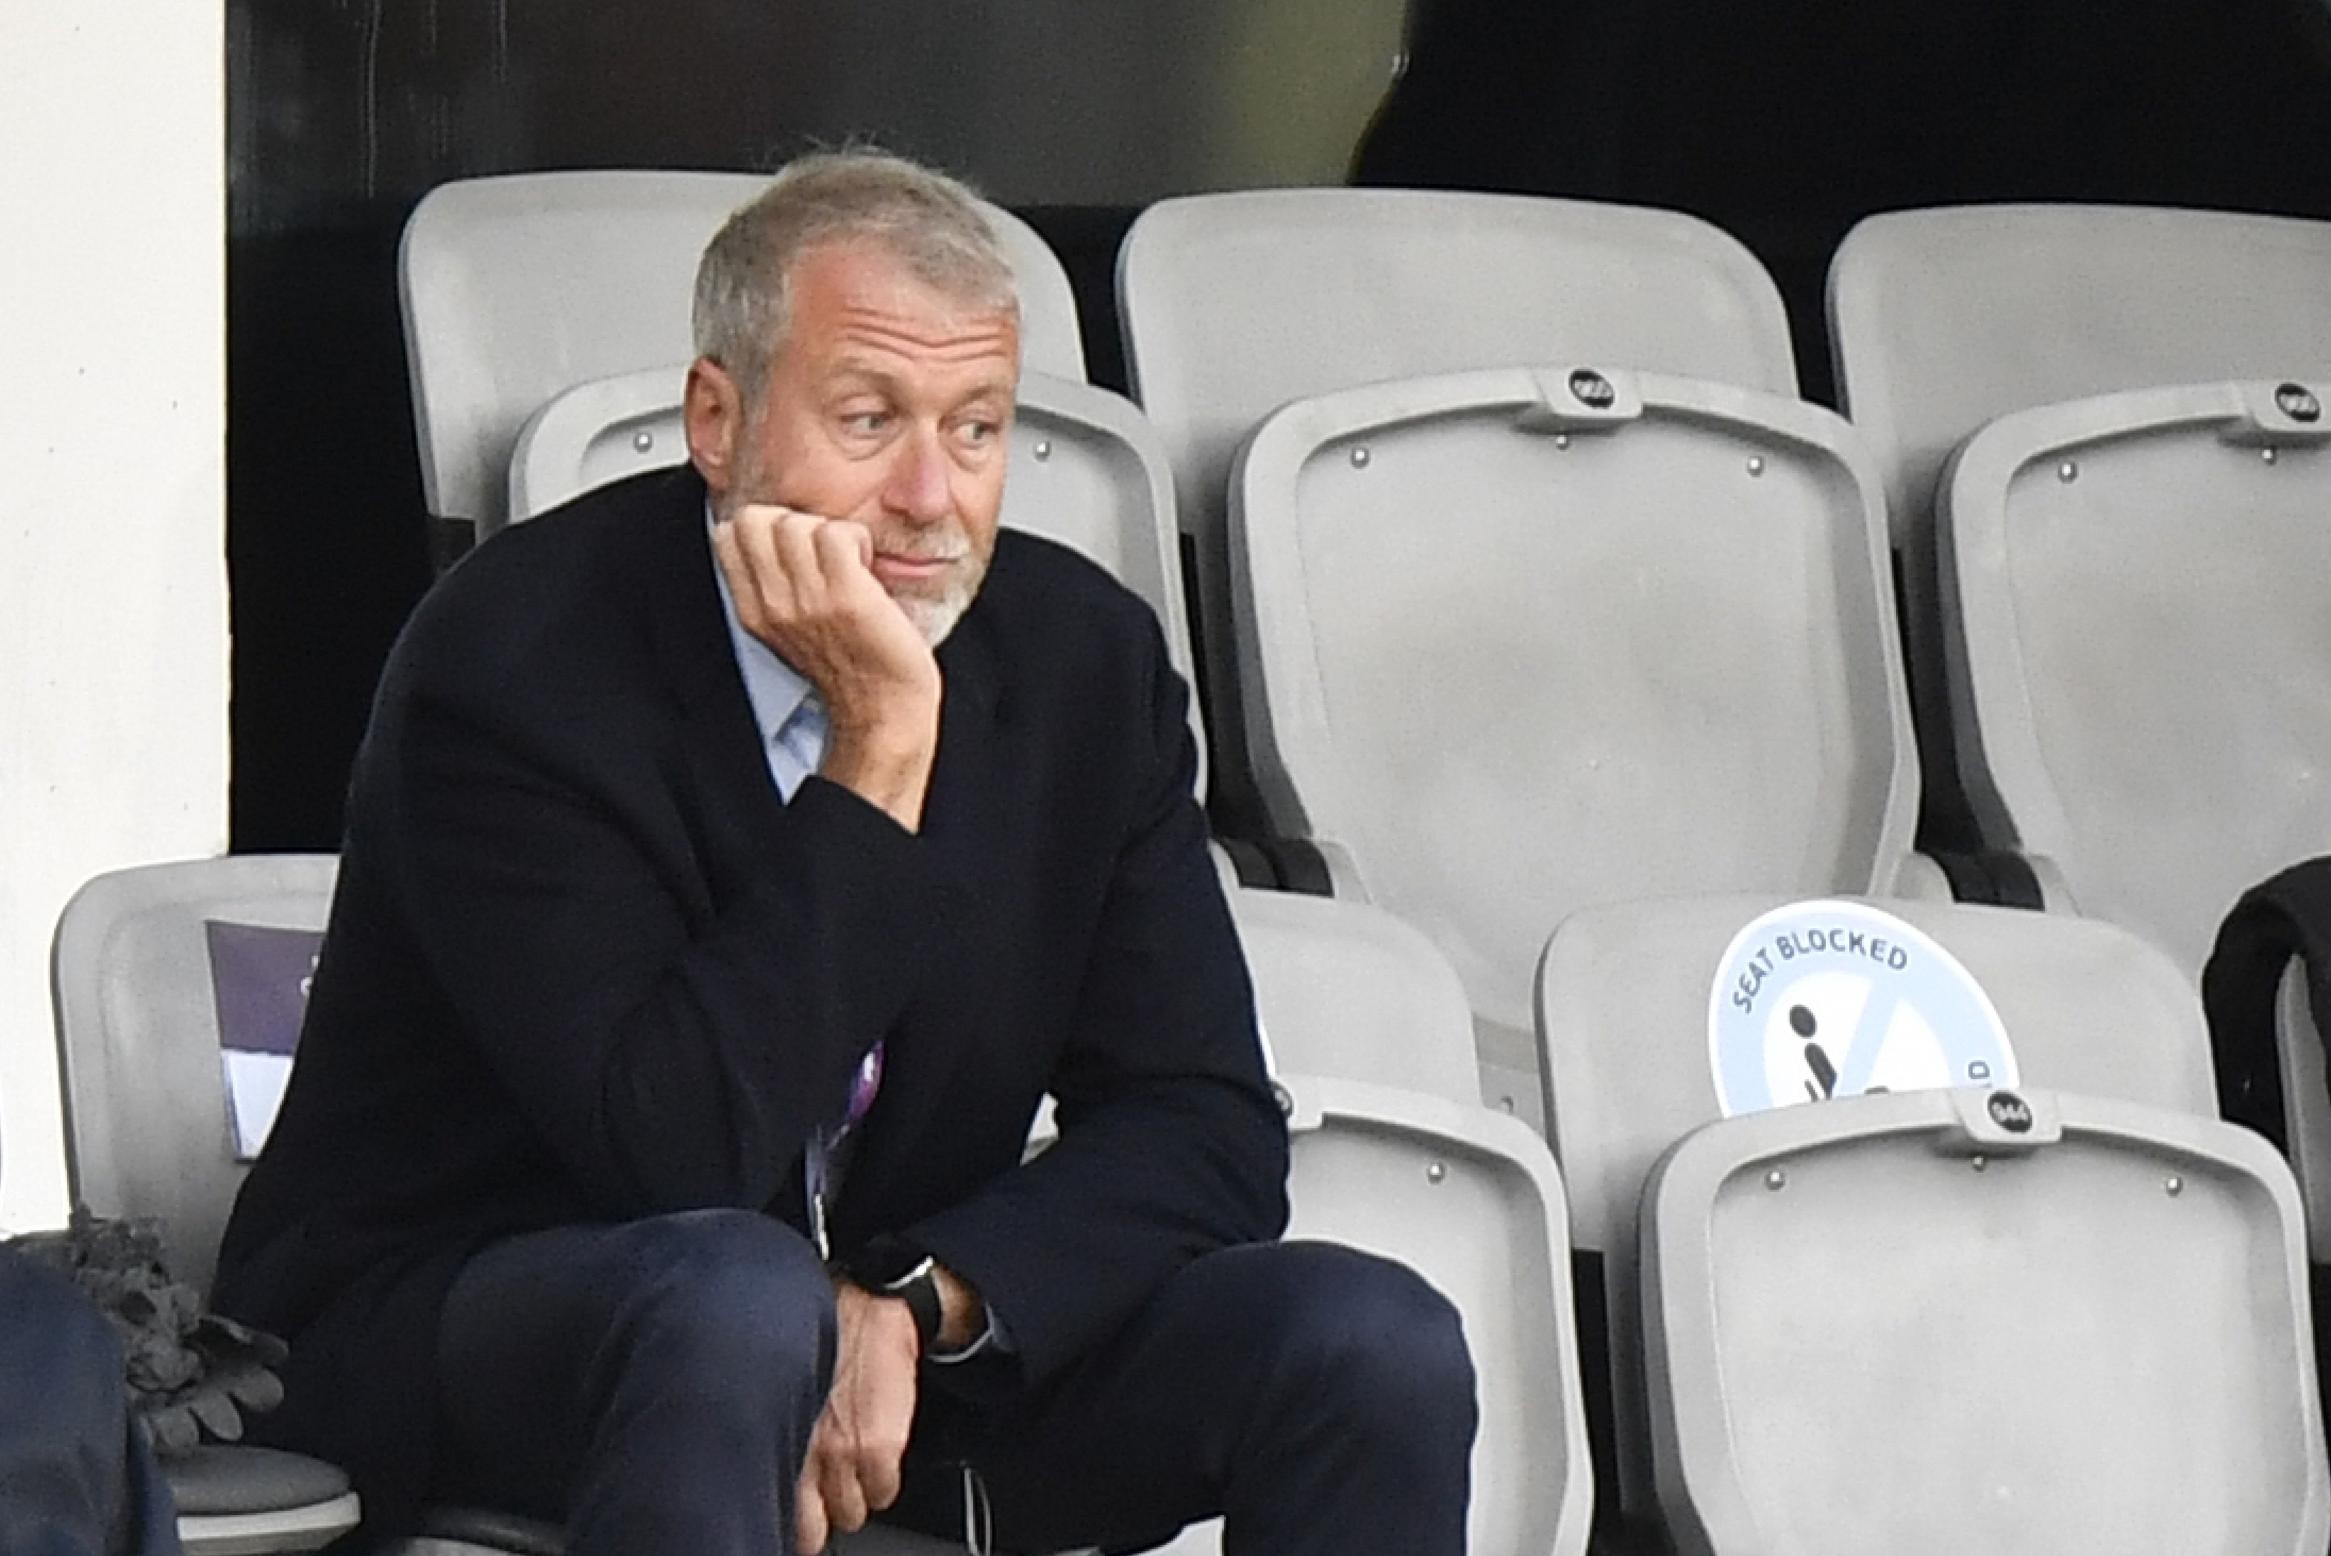 7 billion euros lost: Roman Abramovich’s fortune halved due to sanctions against Russia